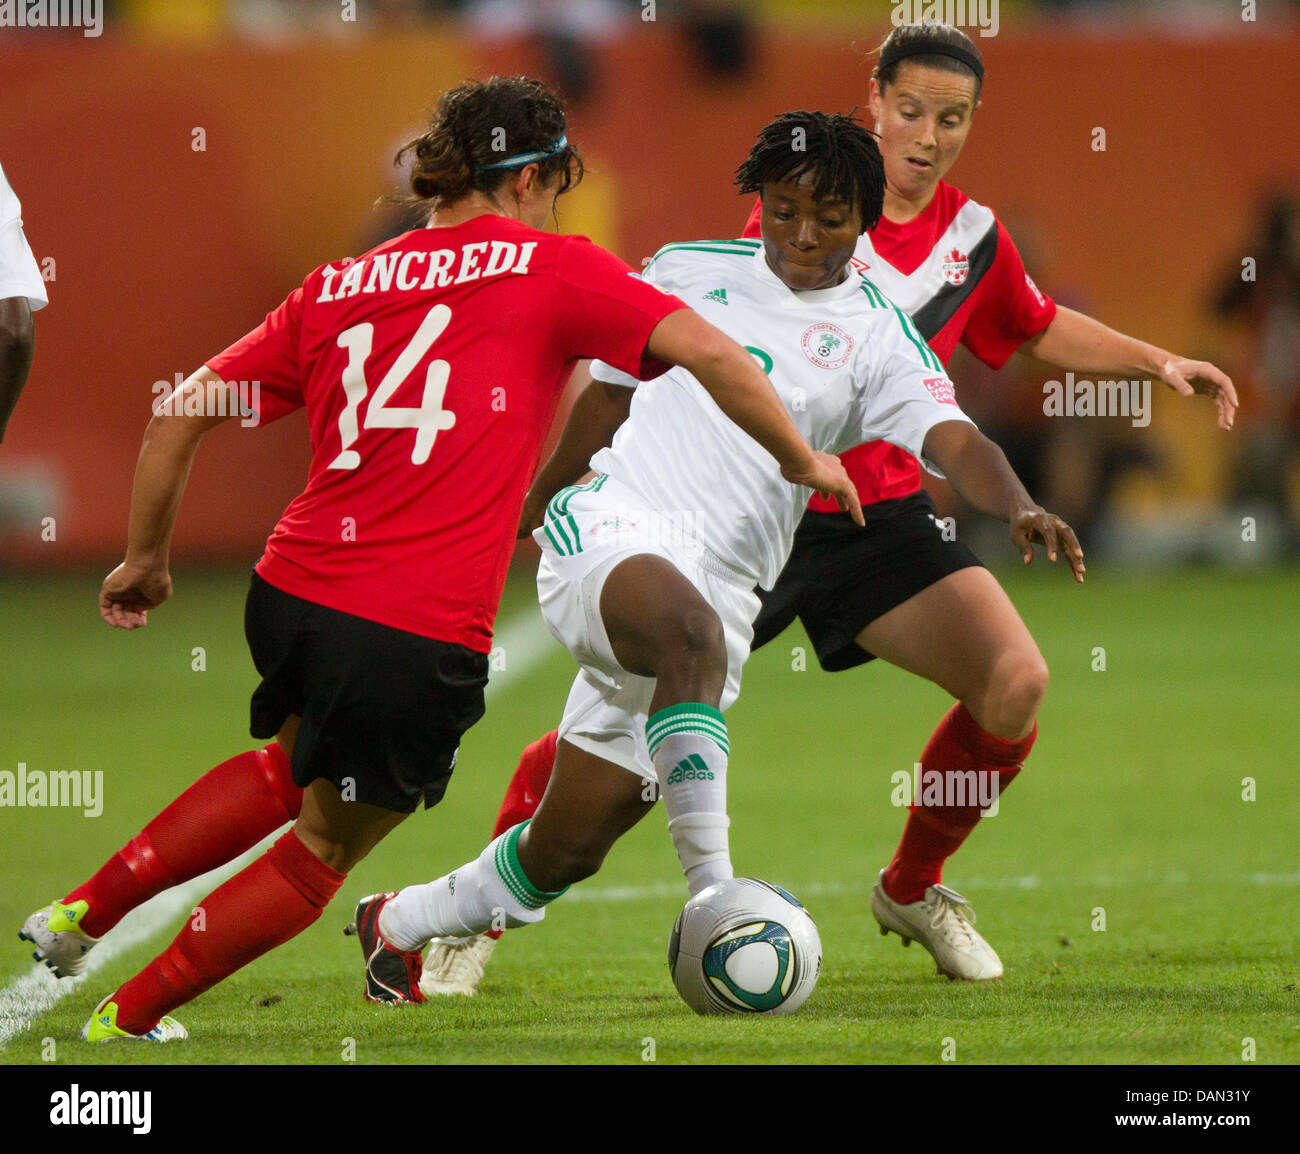 Ebere Orji (C) of Nigeria and Melissa Tancredi (L) of Canada fight for the ball during the Group A match Canada Nigeria against England of FIFA Women's World Cup soccer tournament at the Rudolf Harbig Stadium in Dresden, Germany, 05 July 2011. Foto: Jens Wolf dpa/lsn  +++(c) dpa - Bildfunk+++ Stock Photo